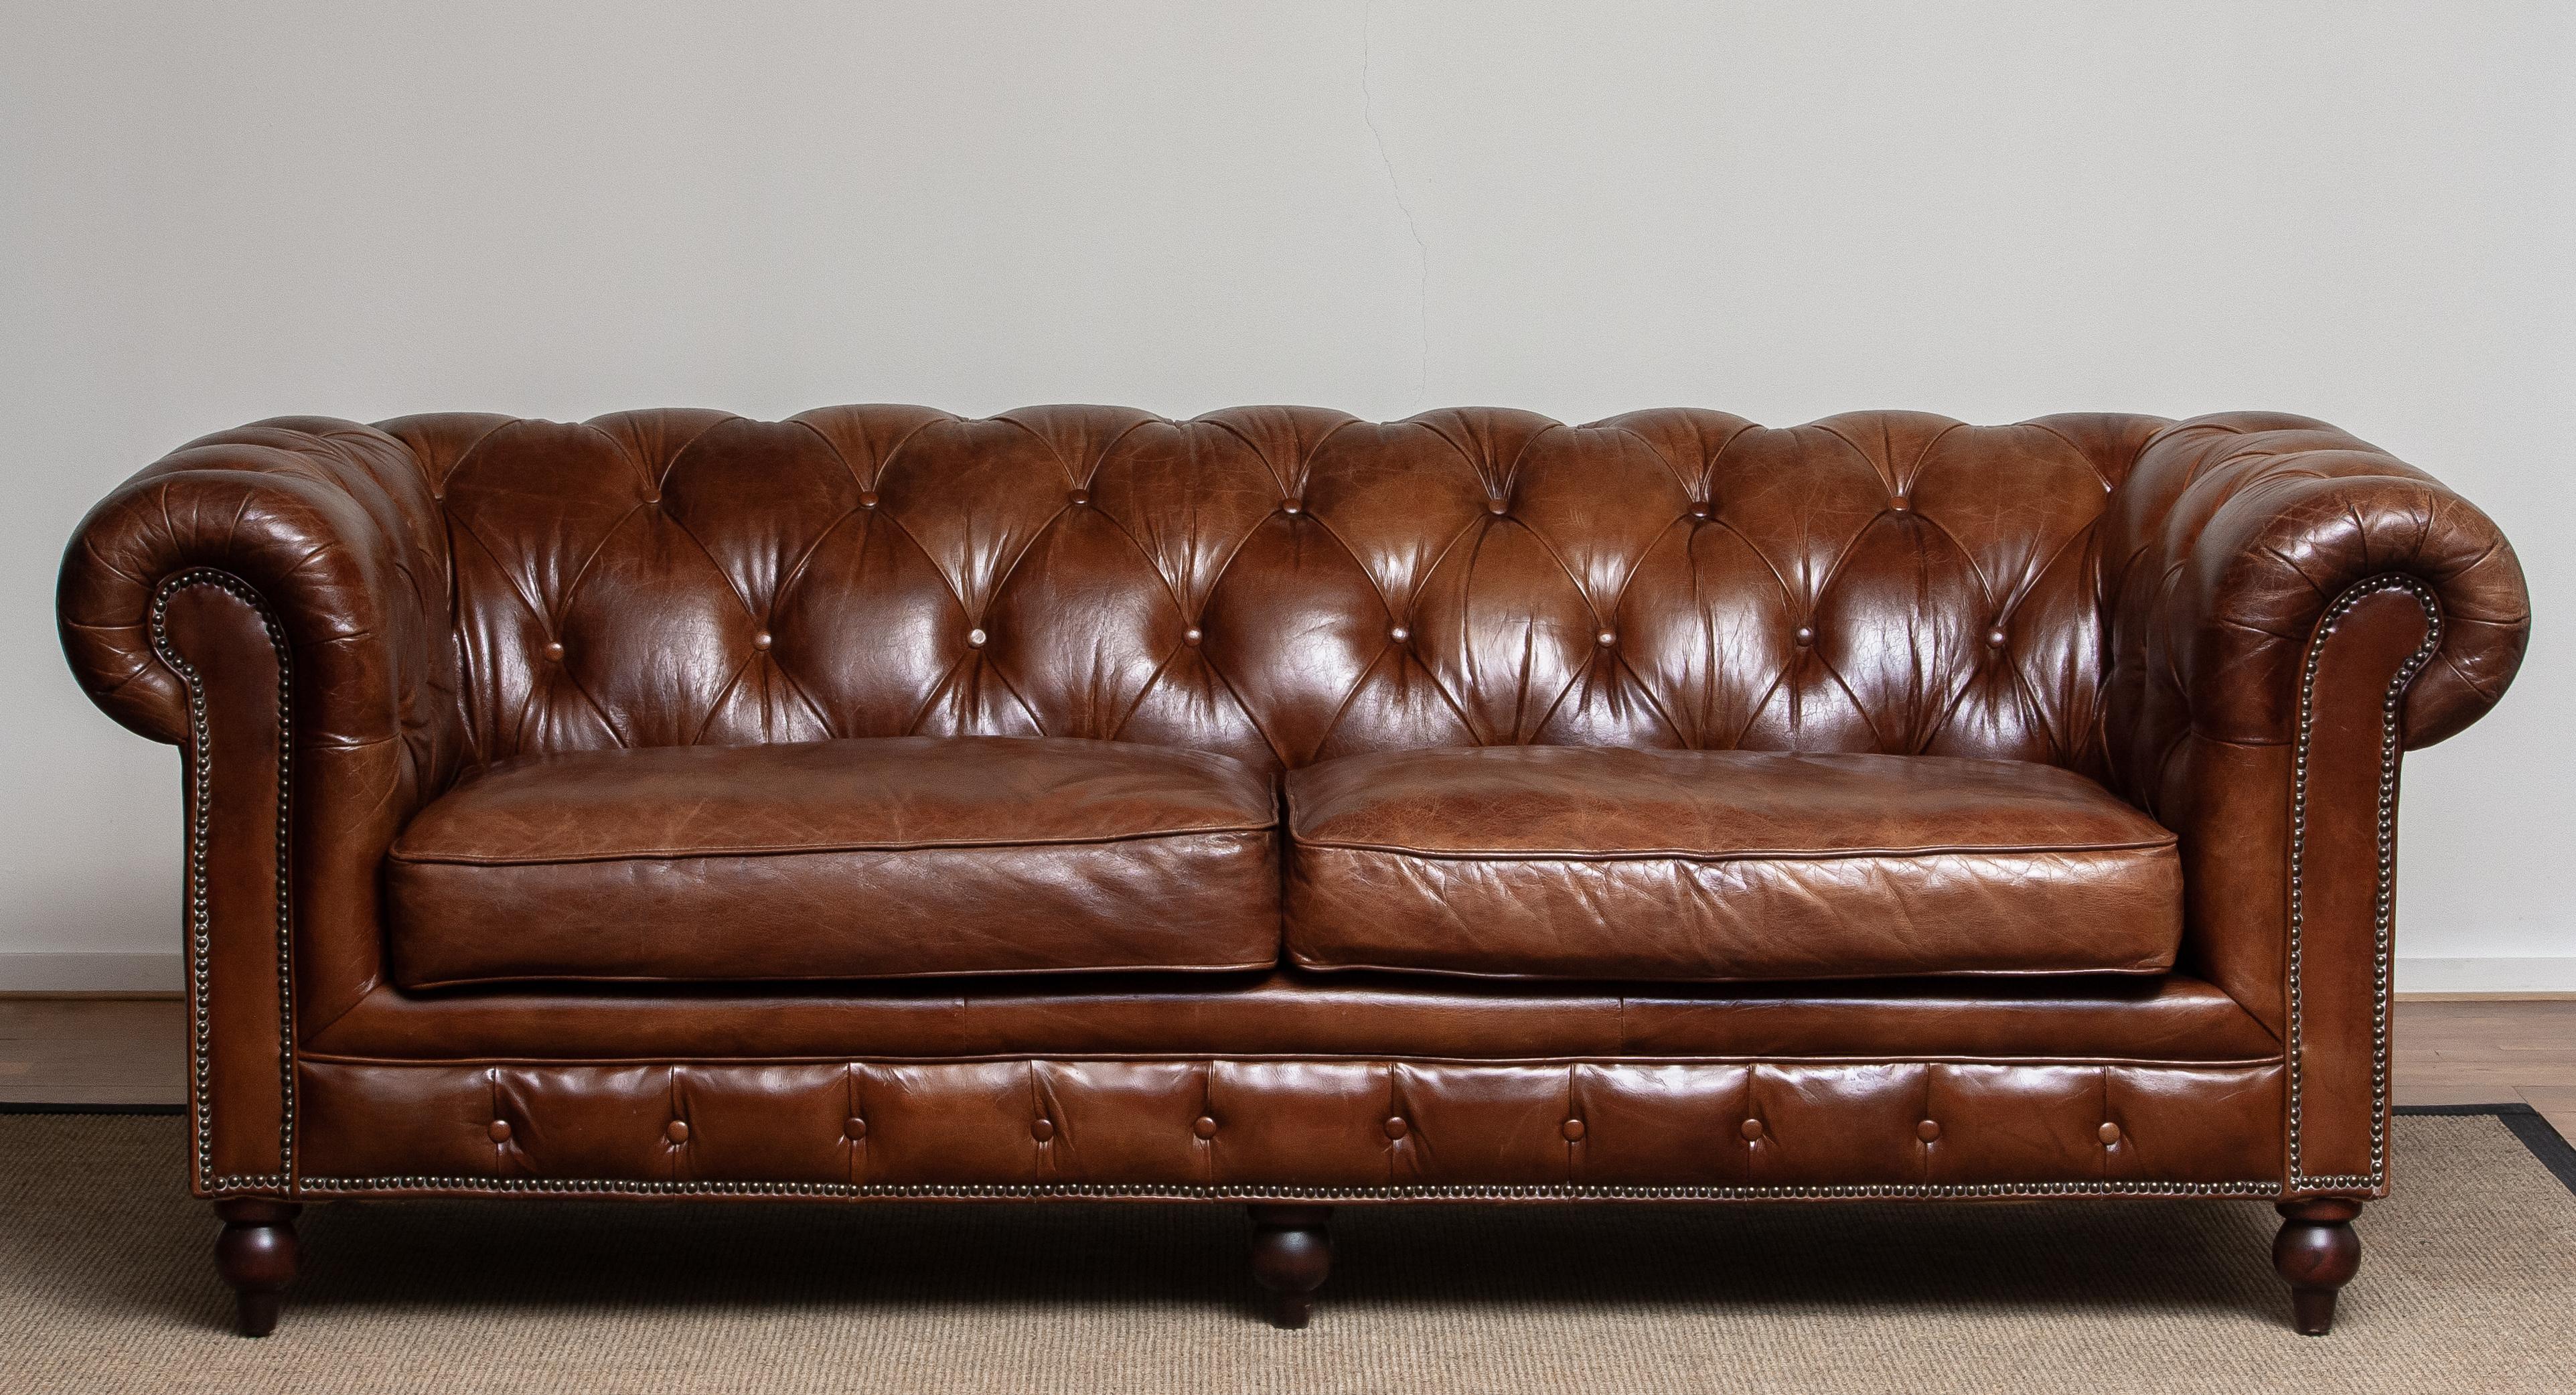 Tufted Brown Leather Chesterfield Sofa and Arm / Lounge Chair 6